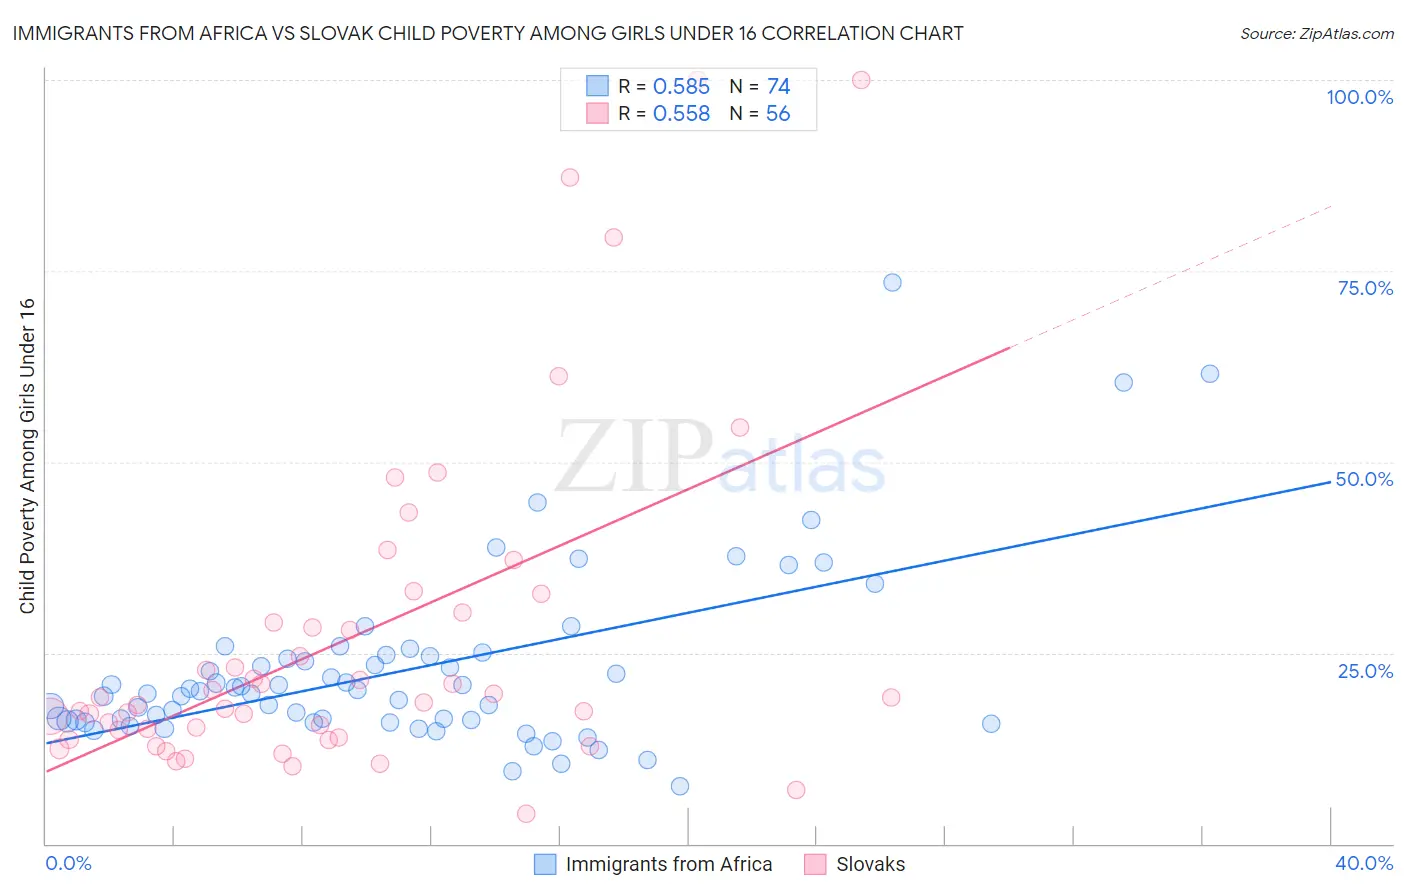 Immigrants from Africa vs Slovak Child Poverty Among Girls Under 16